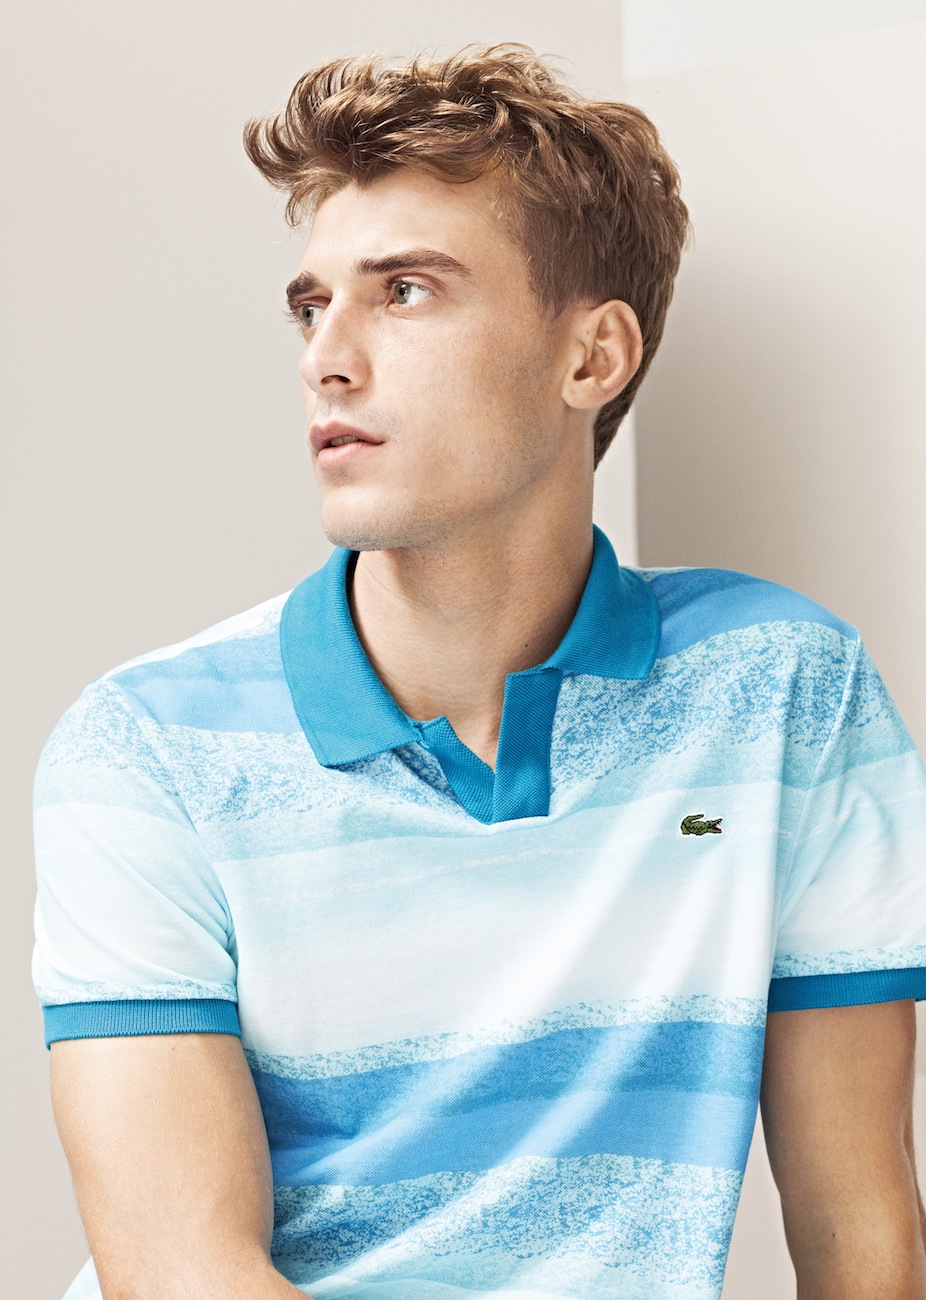 Clément Chabernaud & Charlie Timms Appear in Lacoste's Spring/Summer 2013 Lookbook